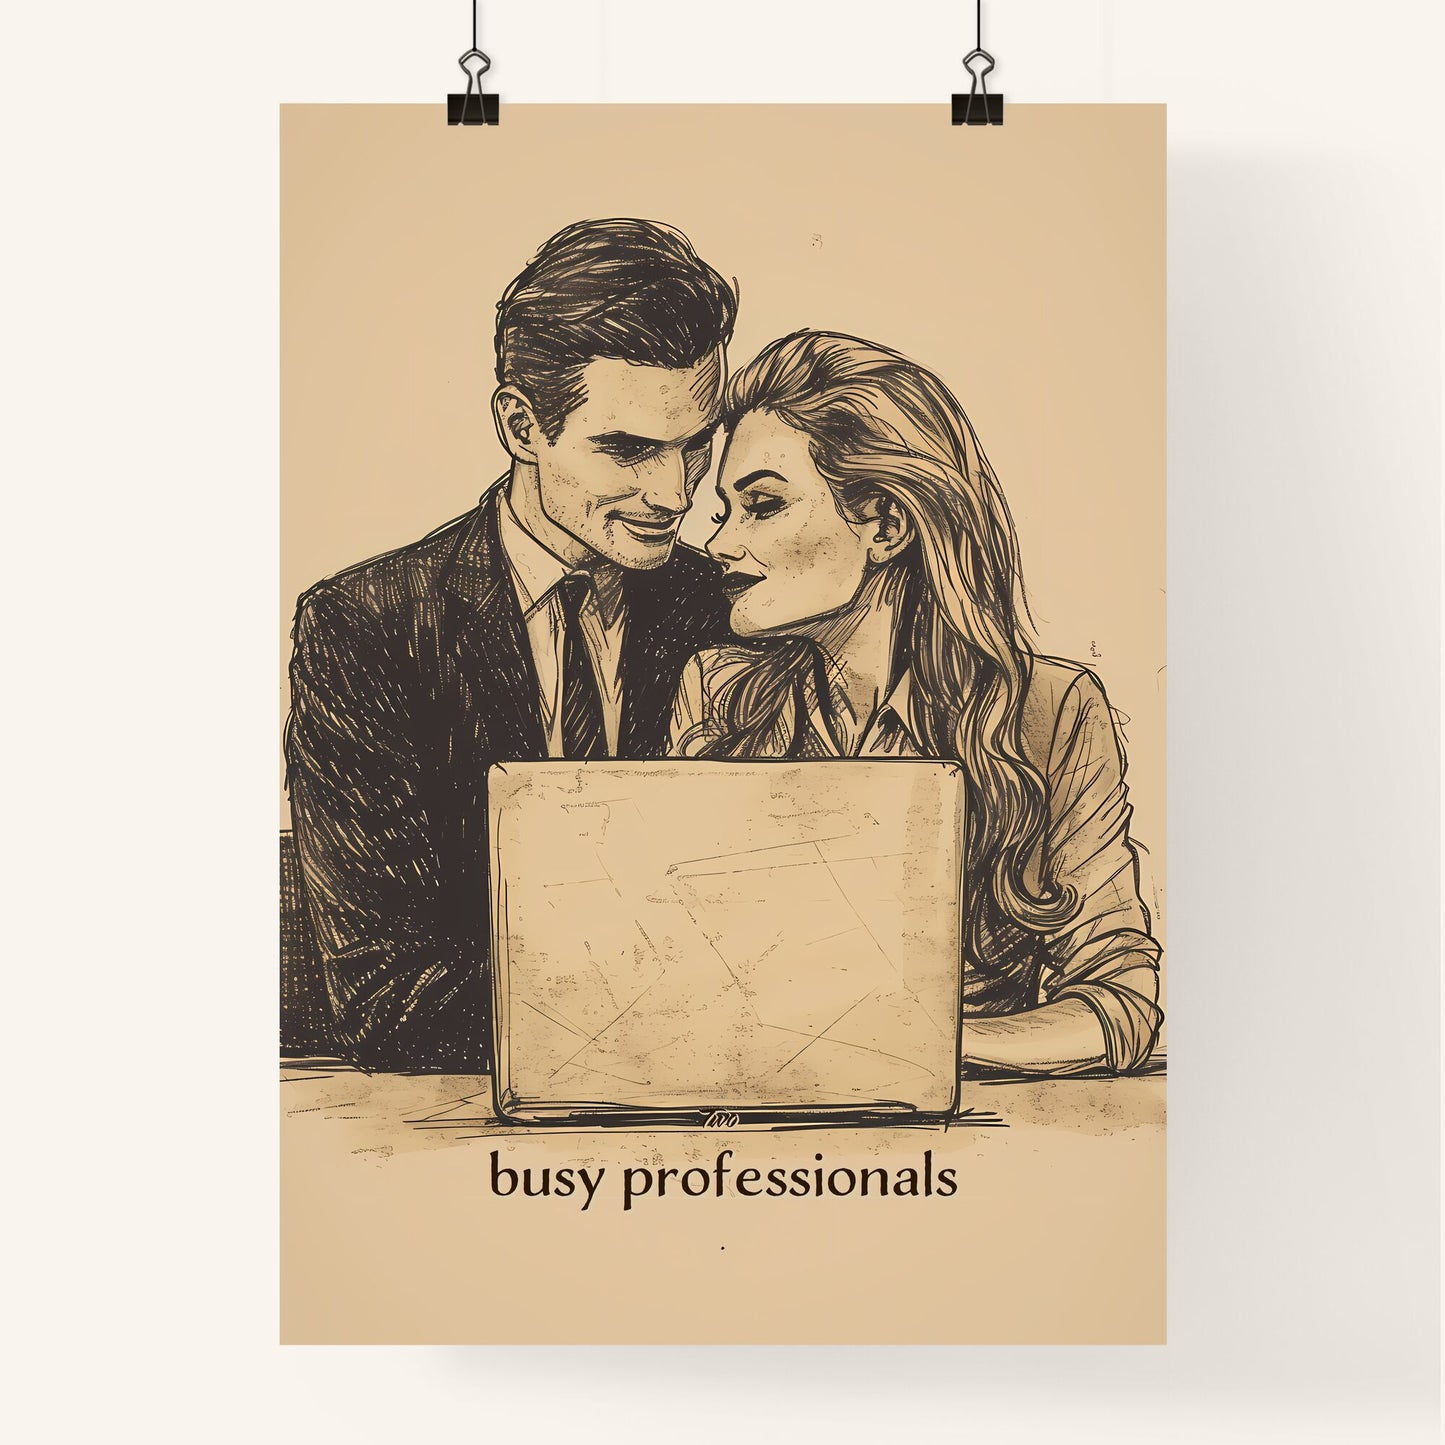 Two, busy professionals, A Poster of a man and woman sitting at a table with a laptop Default Title